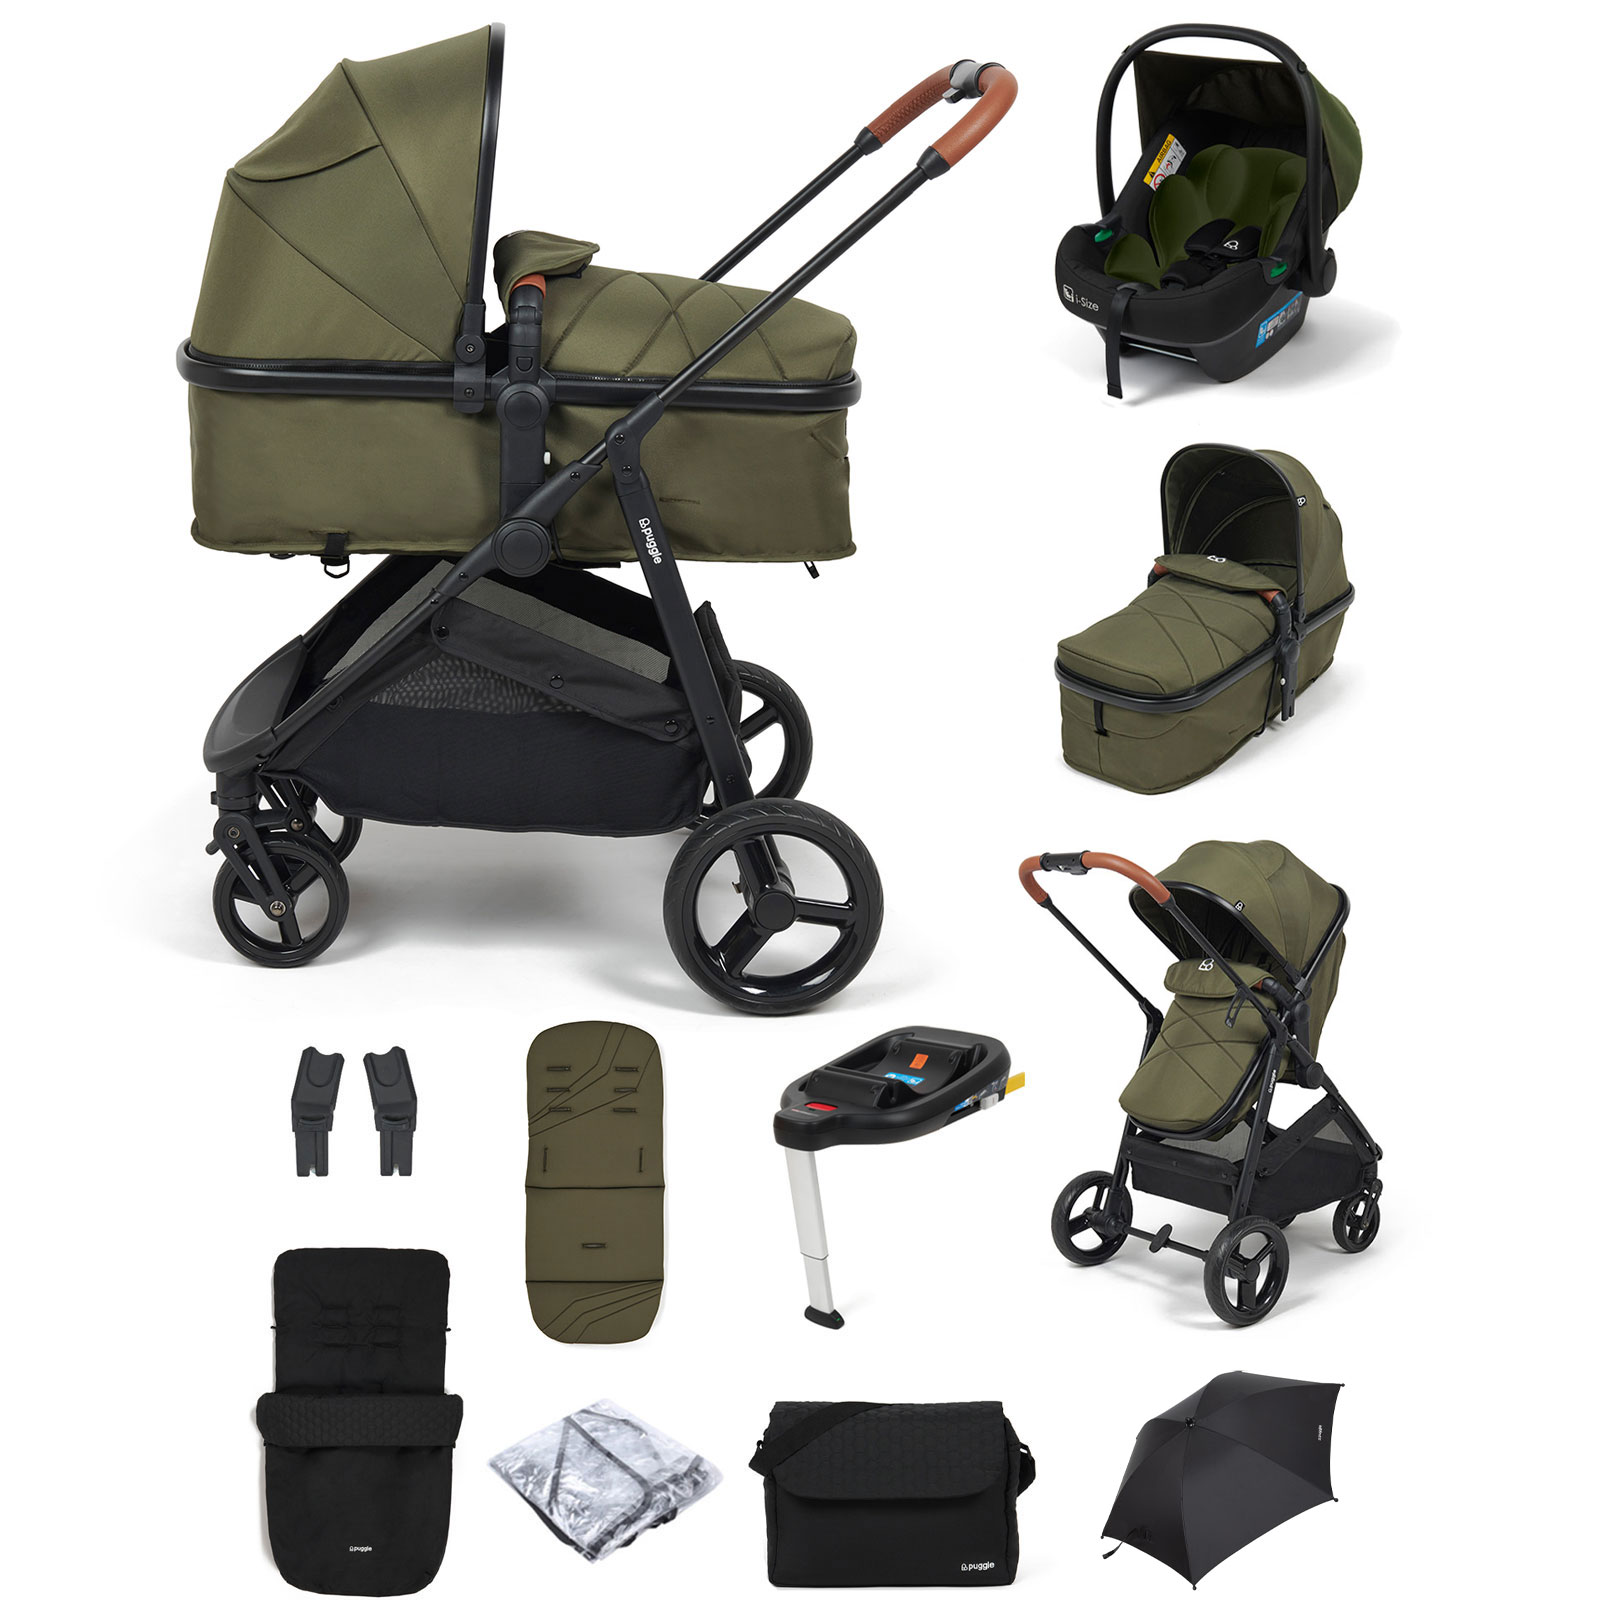 Puggle Monaco XT 2in1 i-Size Travel System with ISOFIX Base, Footmuff, Changing Bag & Parasol - Forest Green